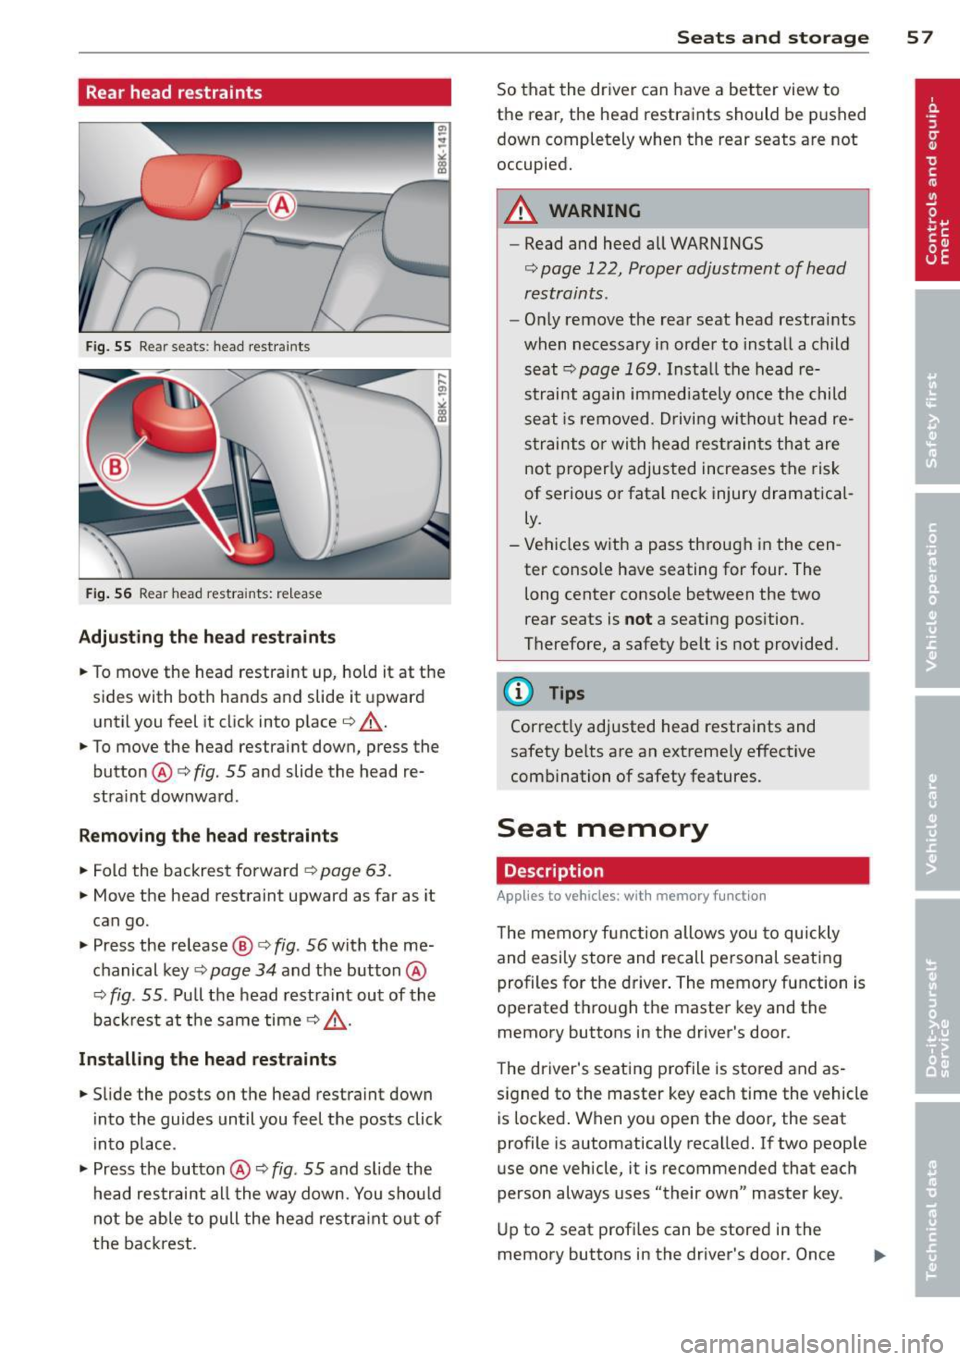 AUDI A5 COUPE 2014  Owners Manual Rear head  restraints 
Fig.  55 Rear  seats : head  restraints 
Fig. 56 Rear  head  restra ints:  re lease 
Adjusting  the  head  restraints 
• To  move  the  head  restraint  up,  hold  it  at  the